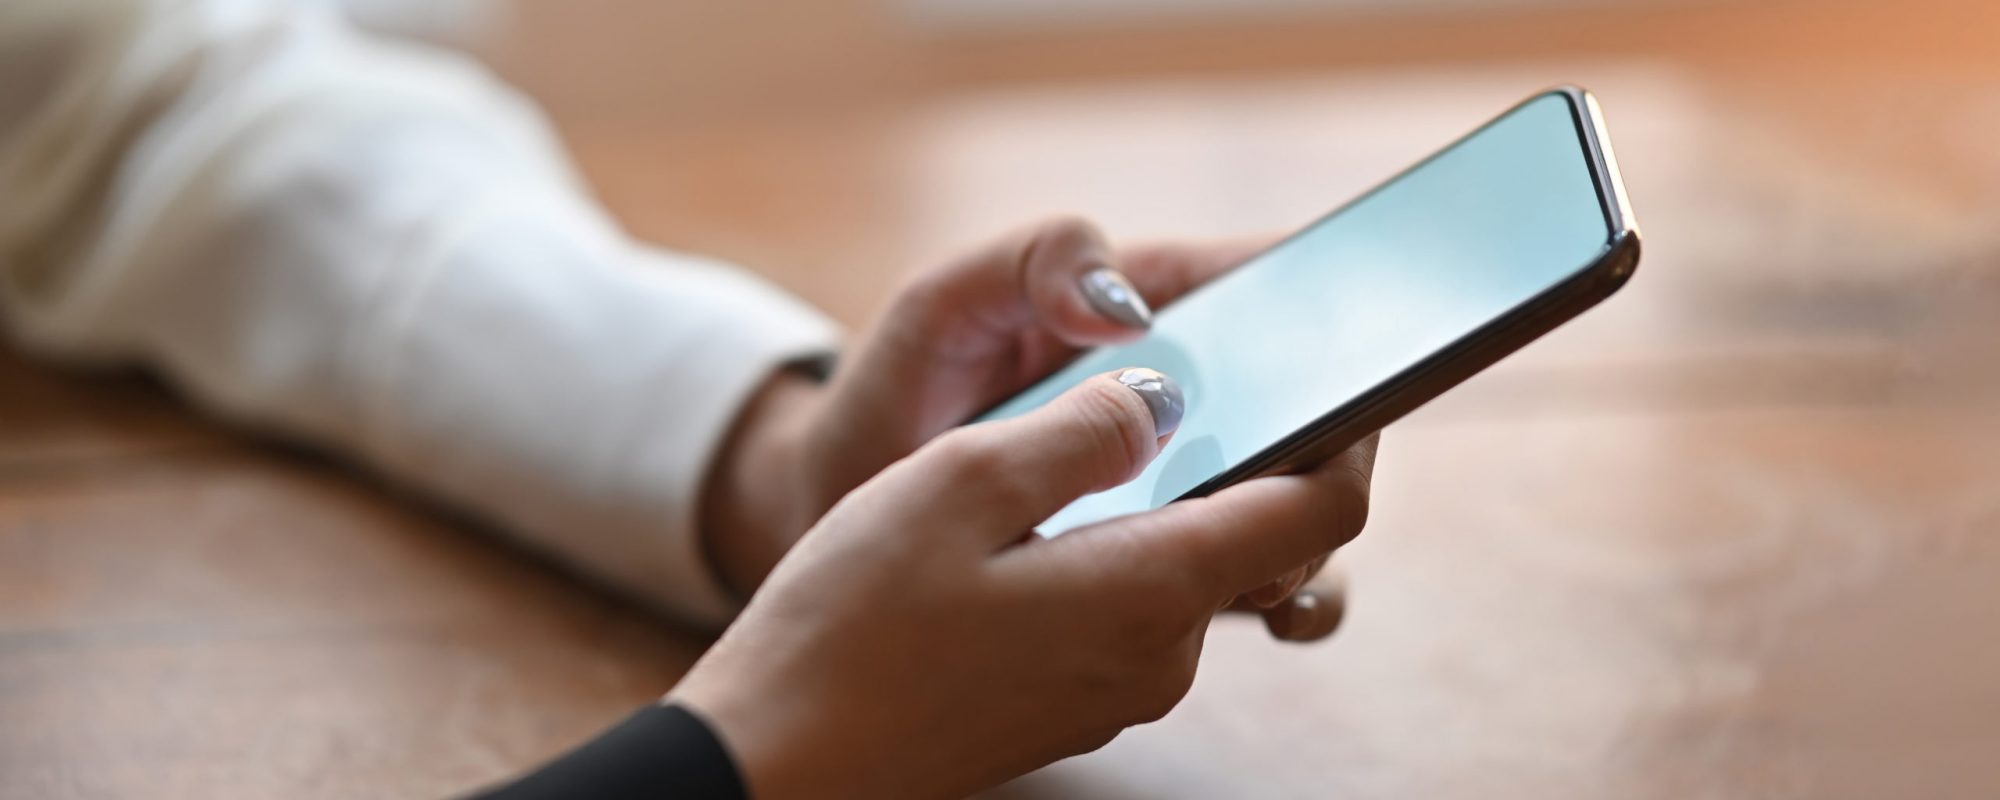 Cropped of woman's hands holding a white blank screen smartphone while sitting and relaxing at the wooden working desk over comfortable living room windows as background.